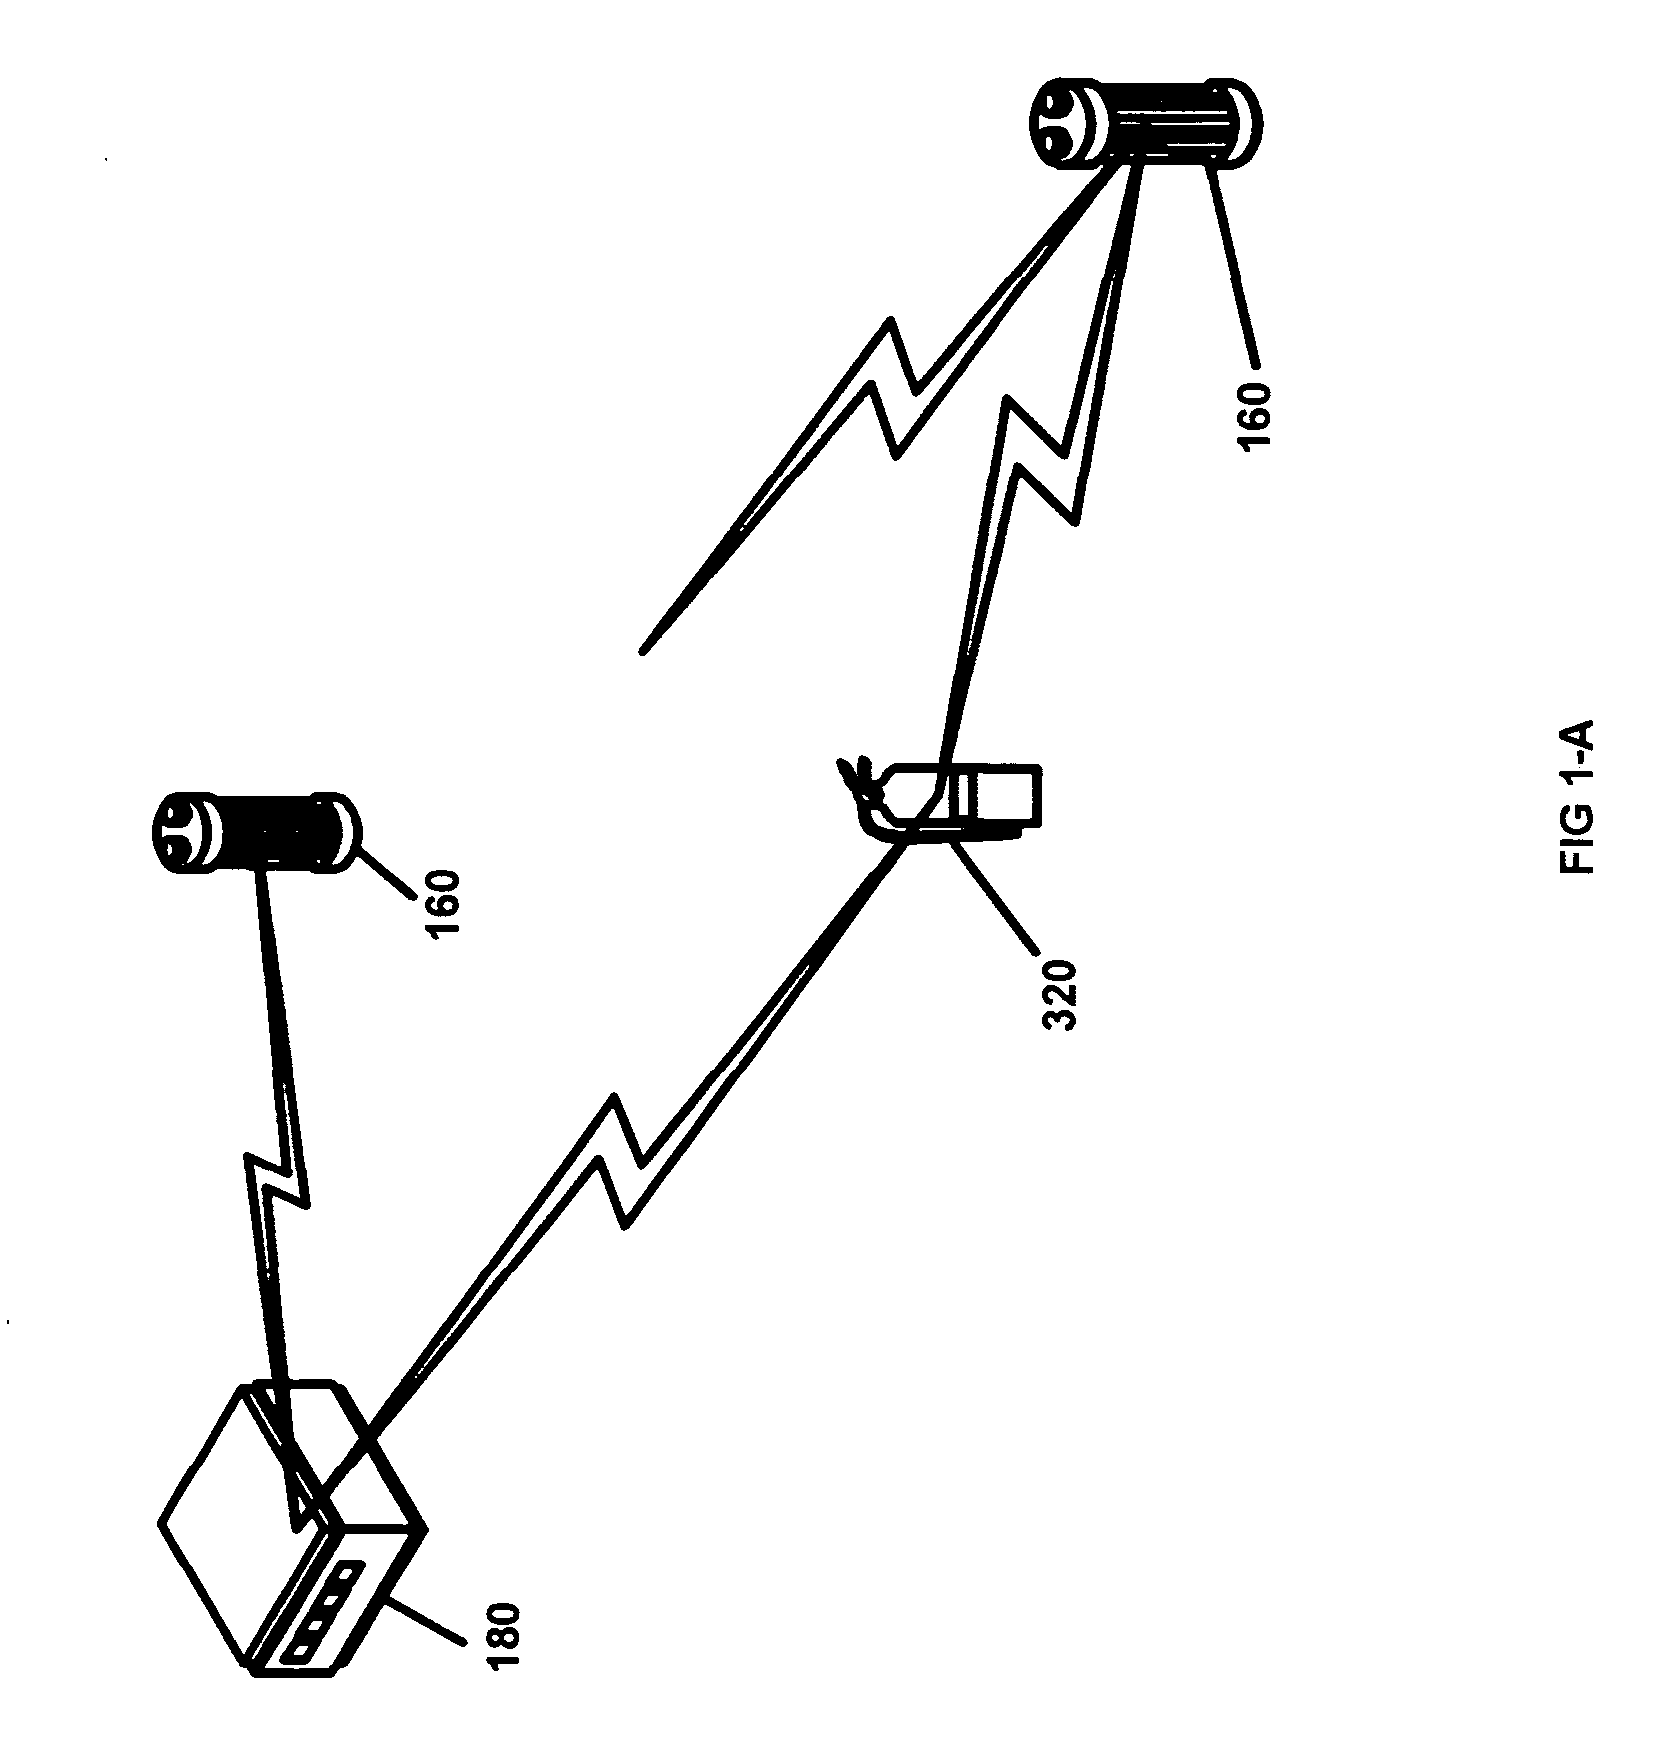 System and method for real time location tracking and communications